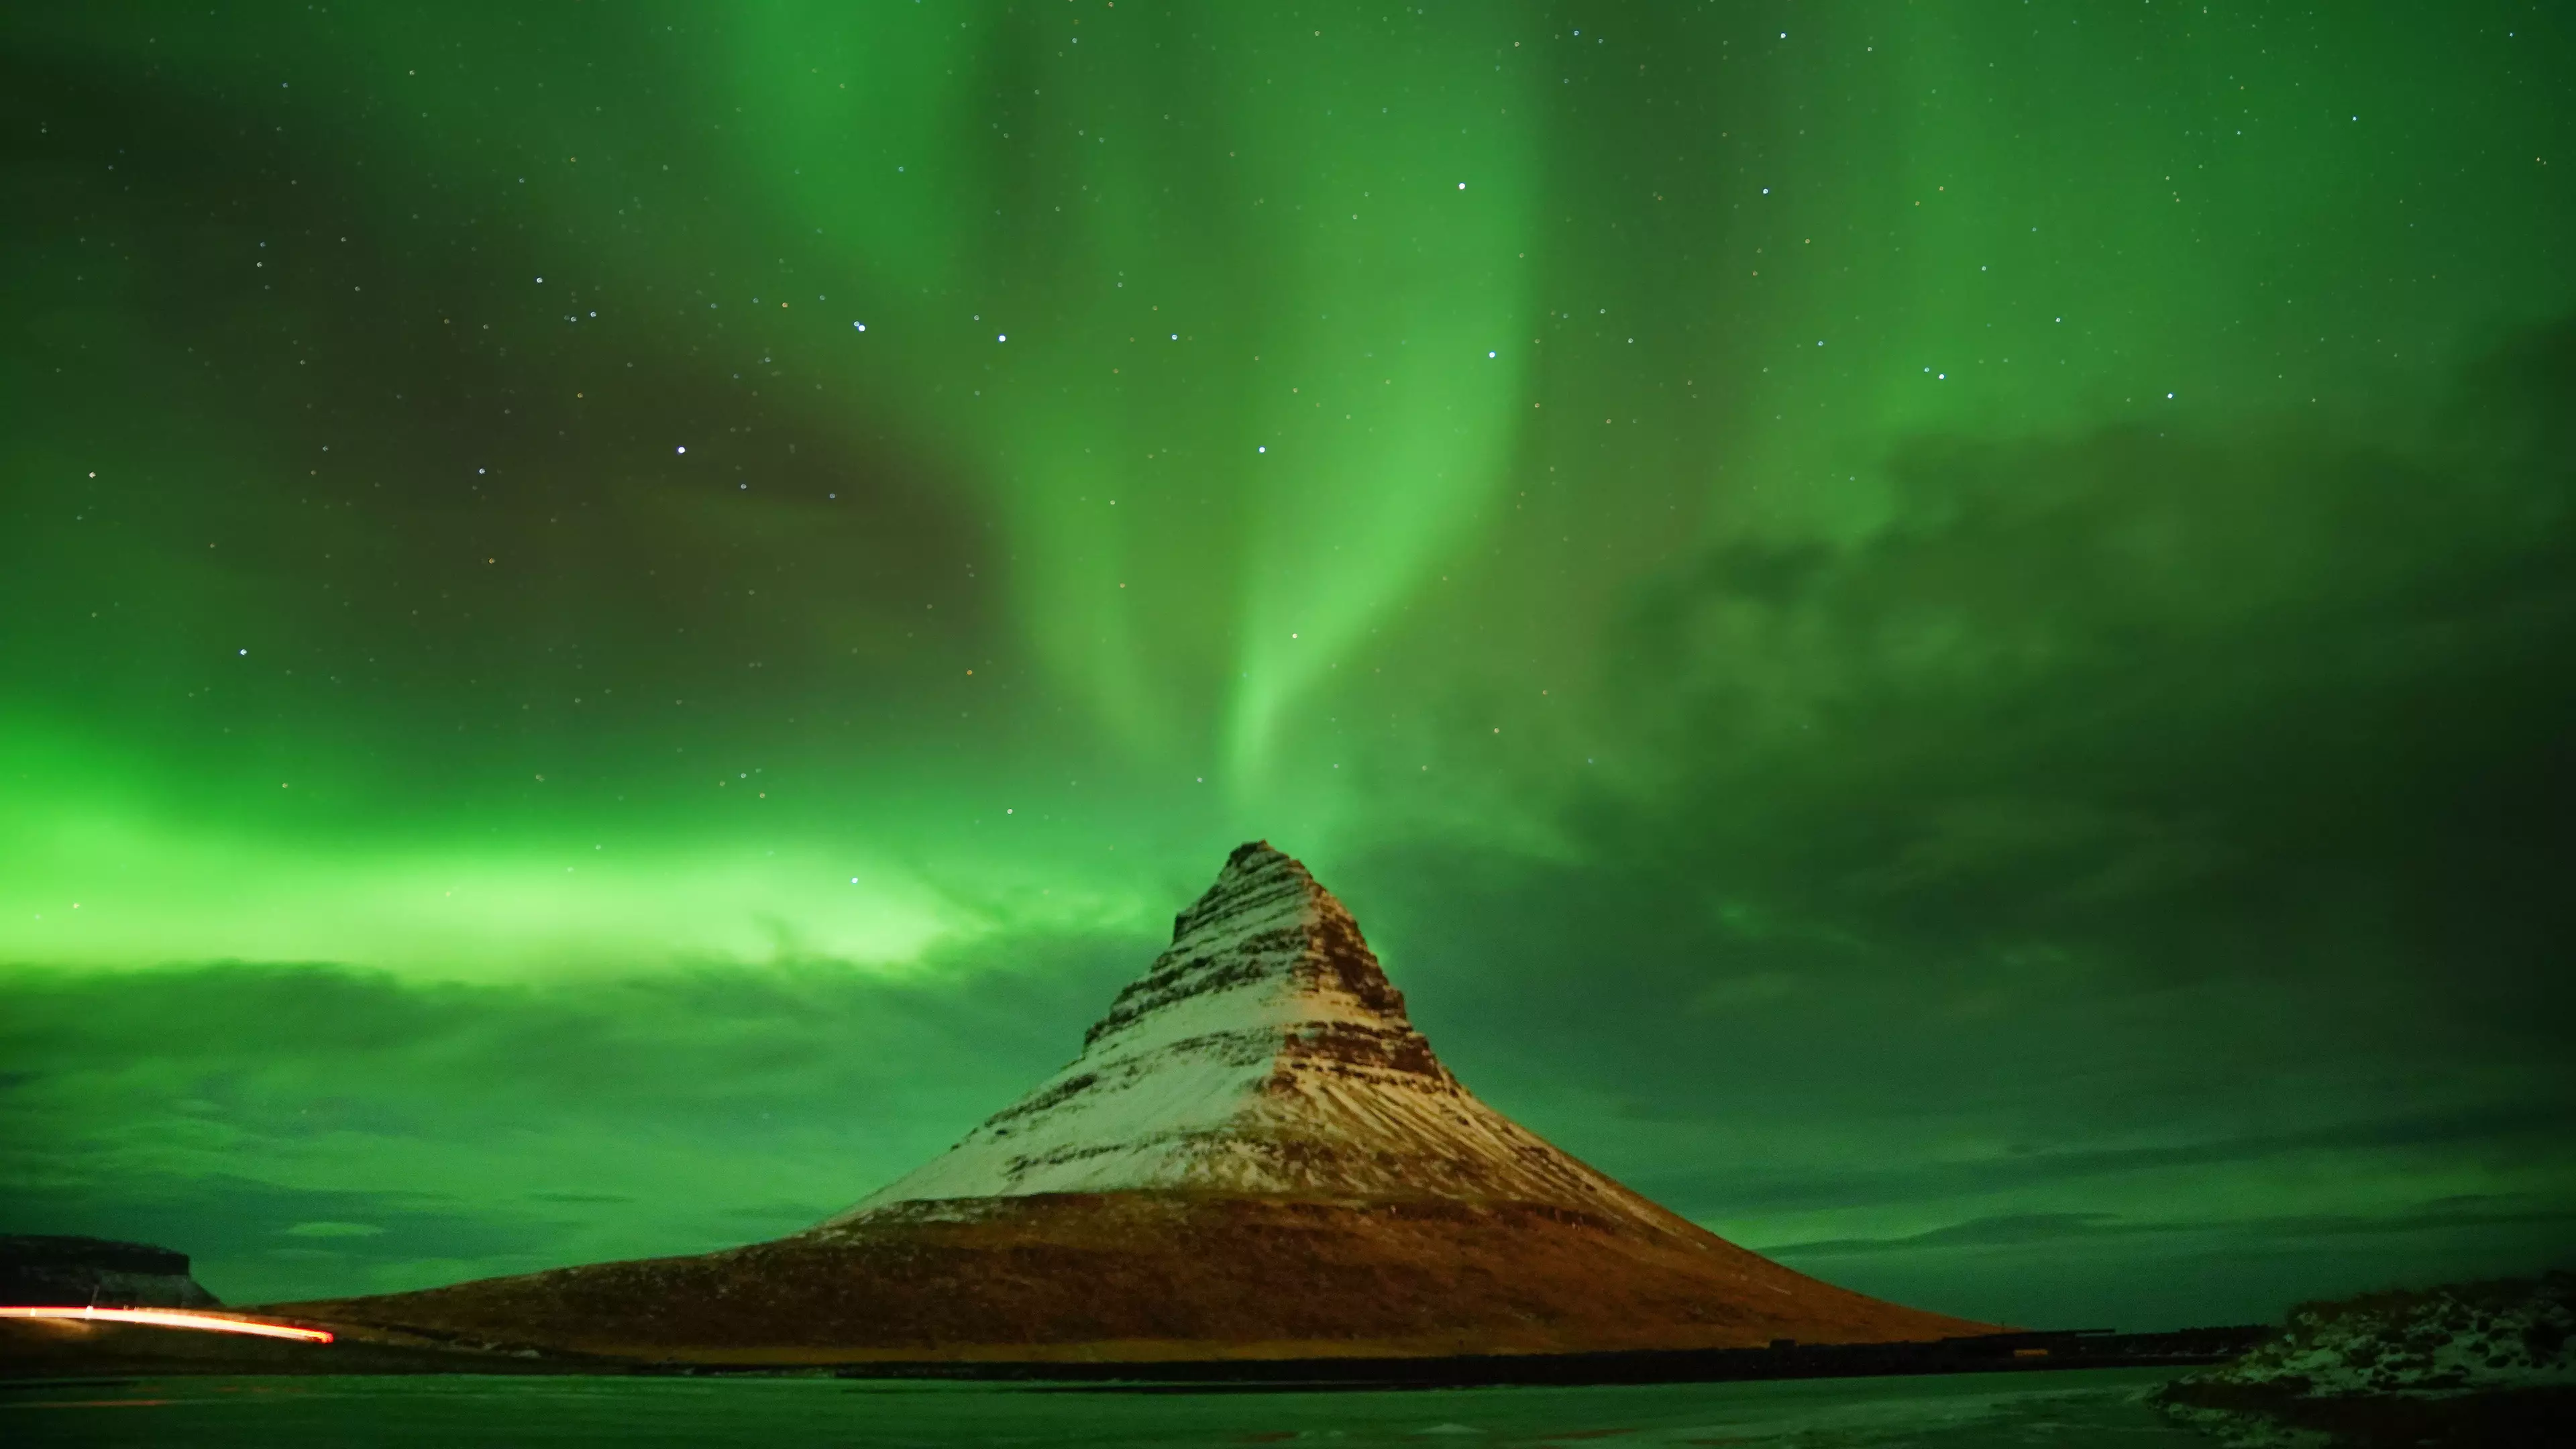 The Northern Lights Could Be Visible Over The UK This Weekend